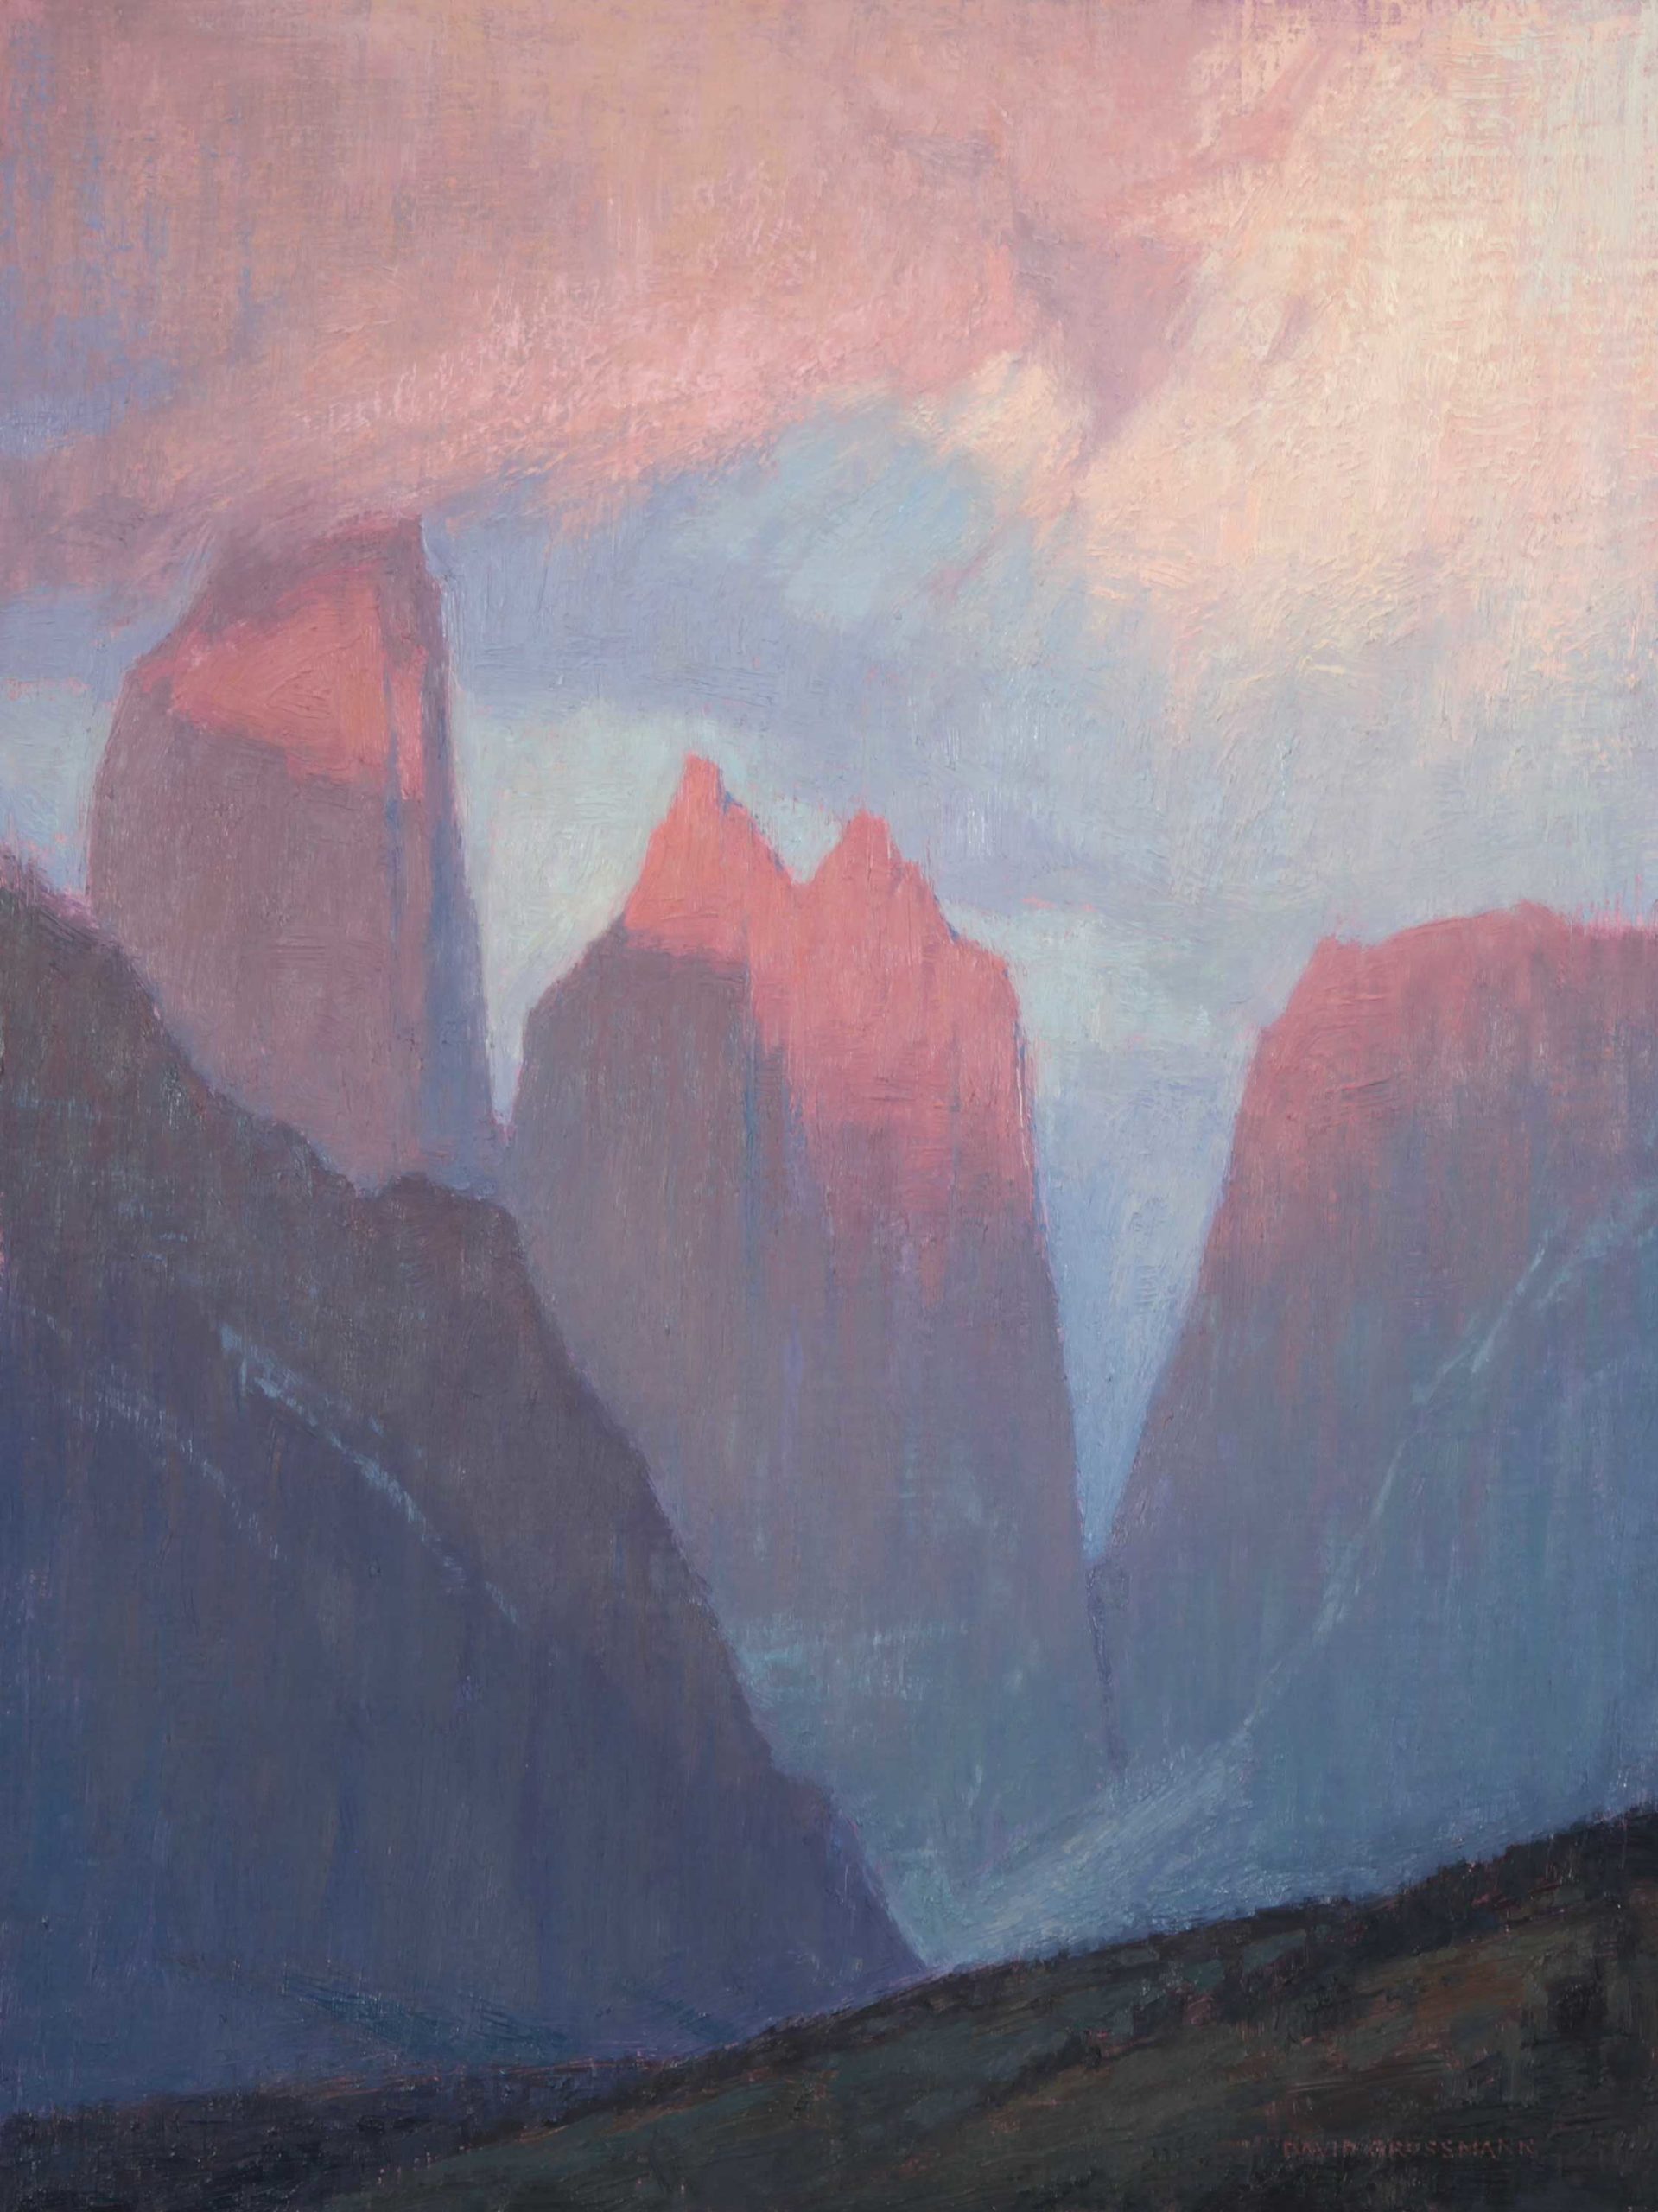 David Grossman, "Sunrise on the Towers," 16 x 12 inches, Oil on panel